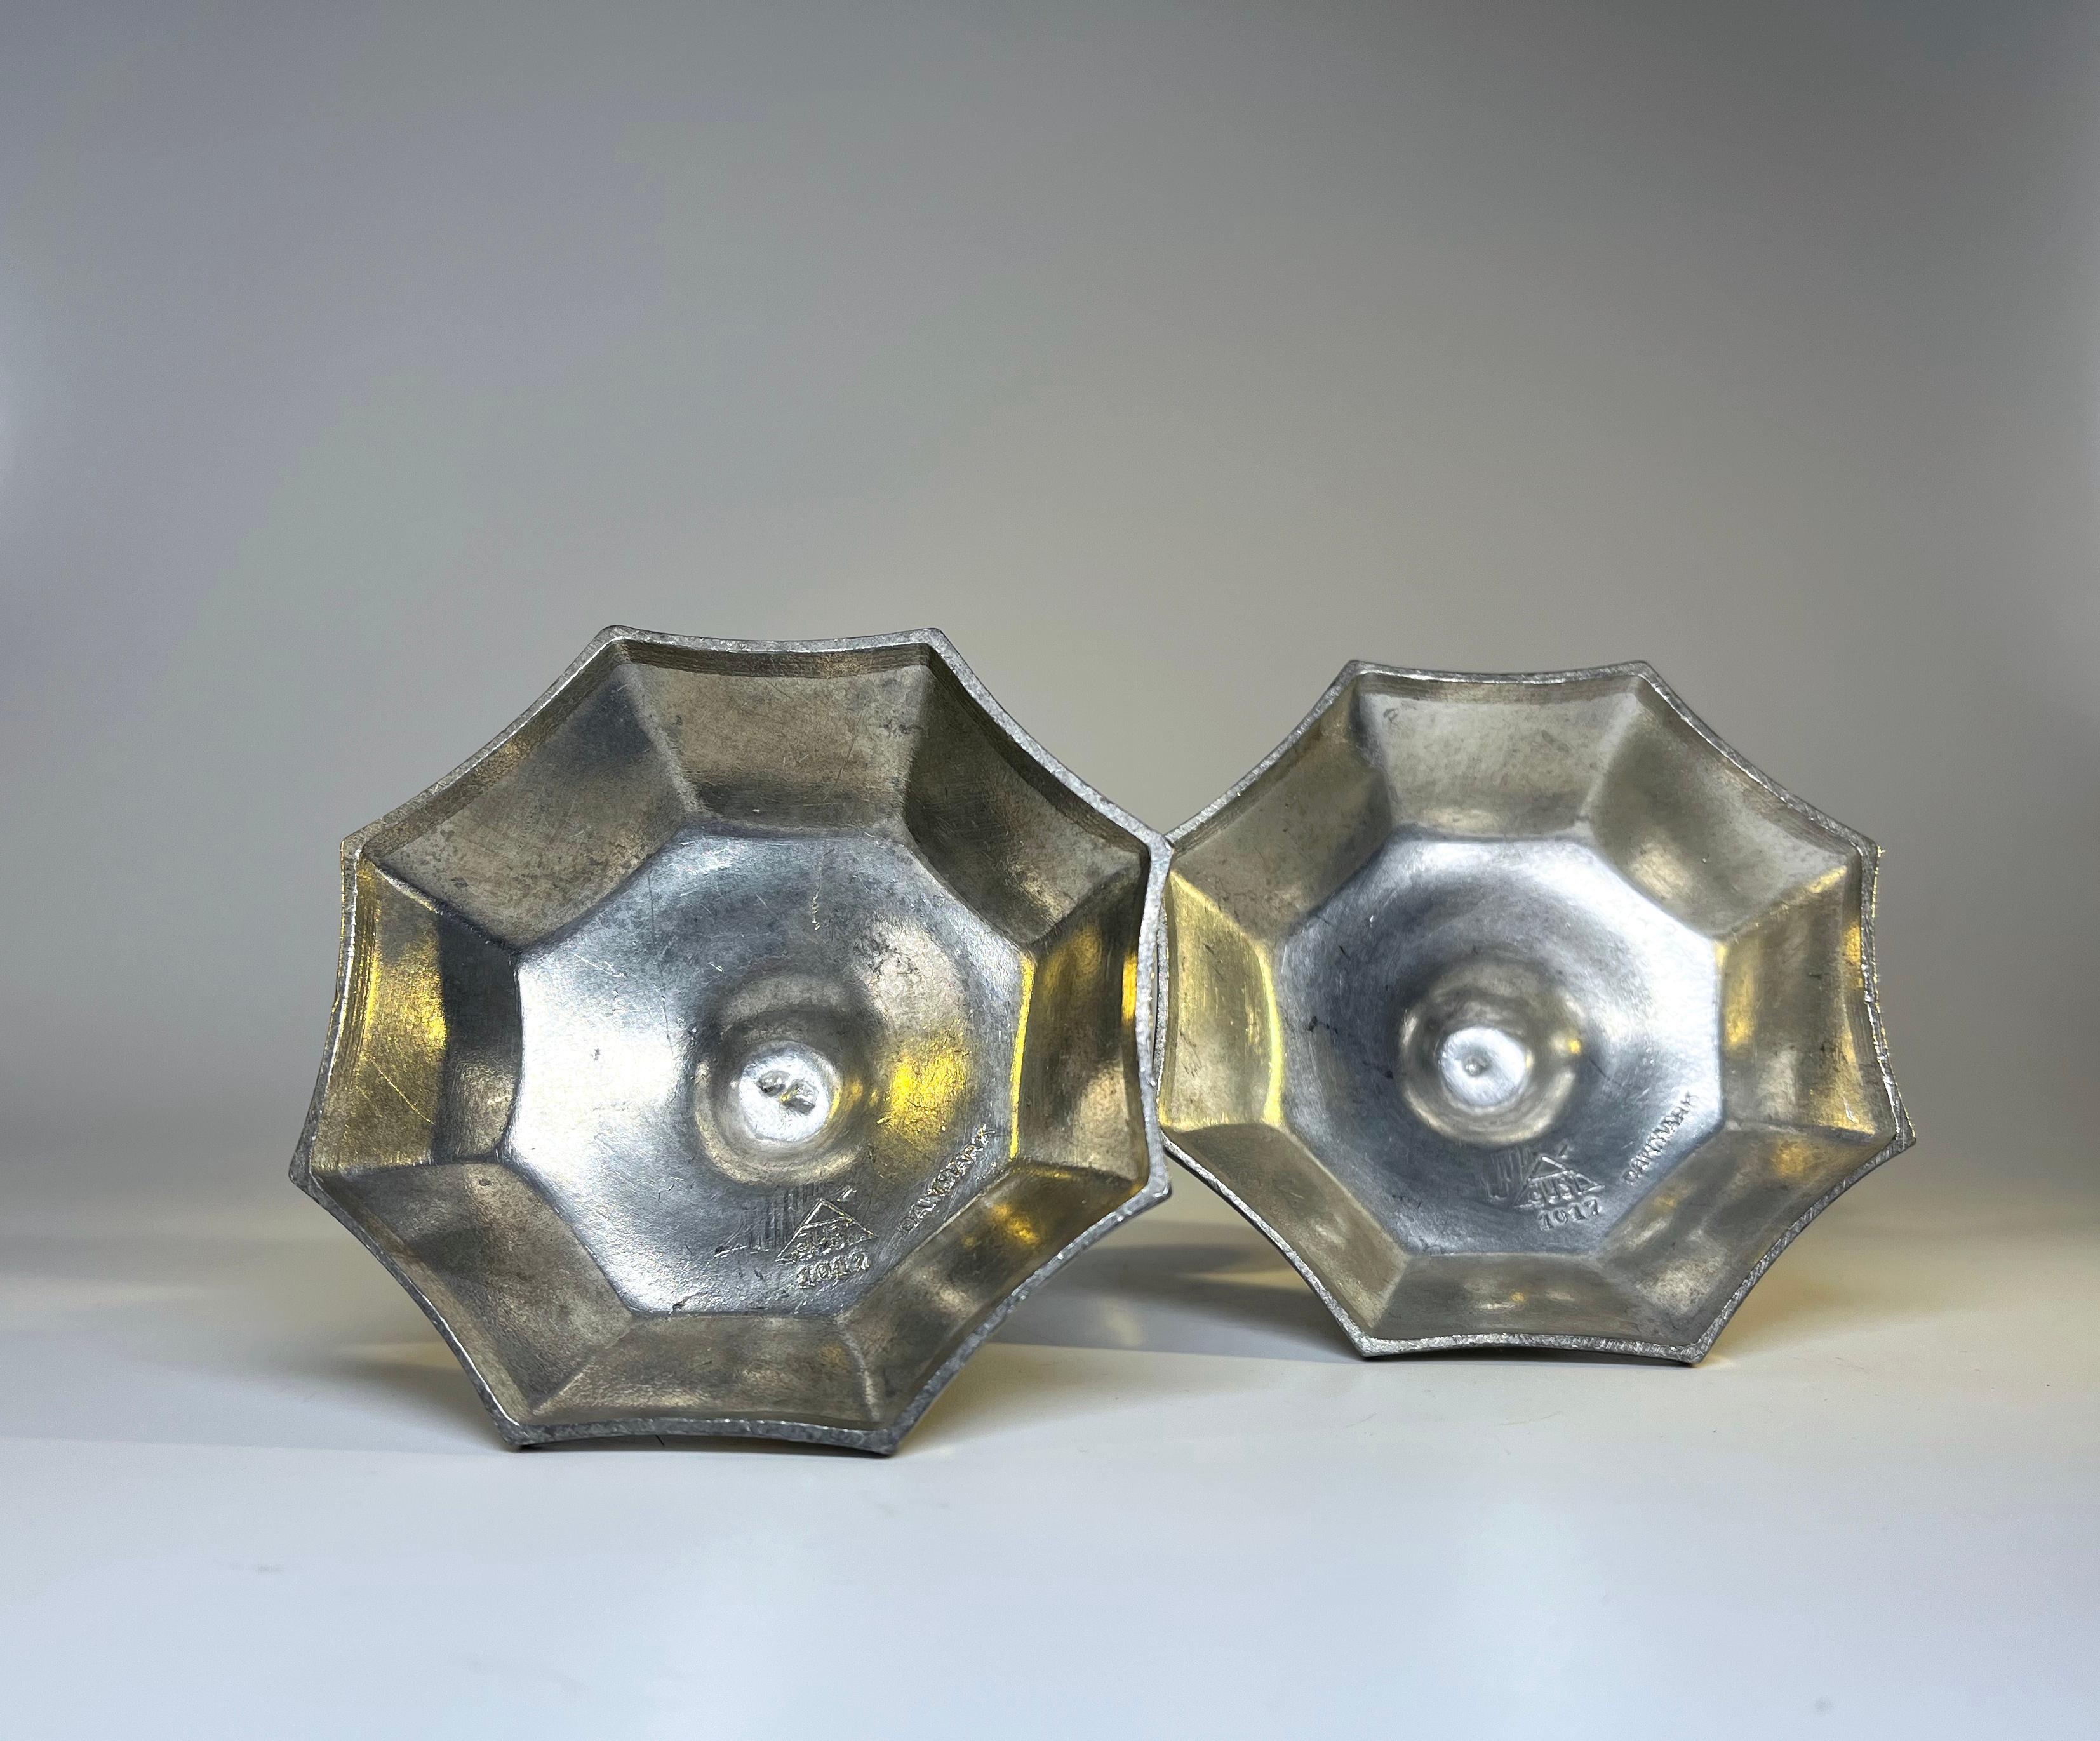 Hexagonal Pair Of Just Andersen, Denmark Pewter Candlesticks #1017 In Good Condition For Sale In Rothley, Leicestershire